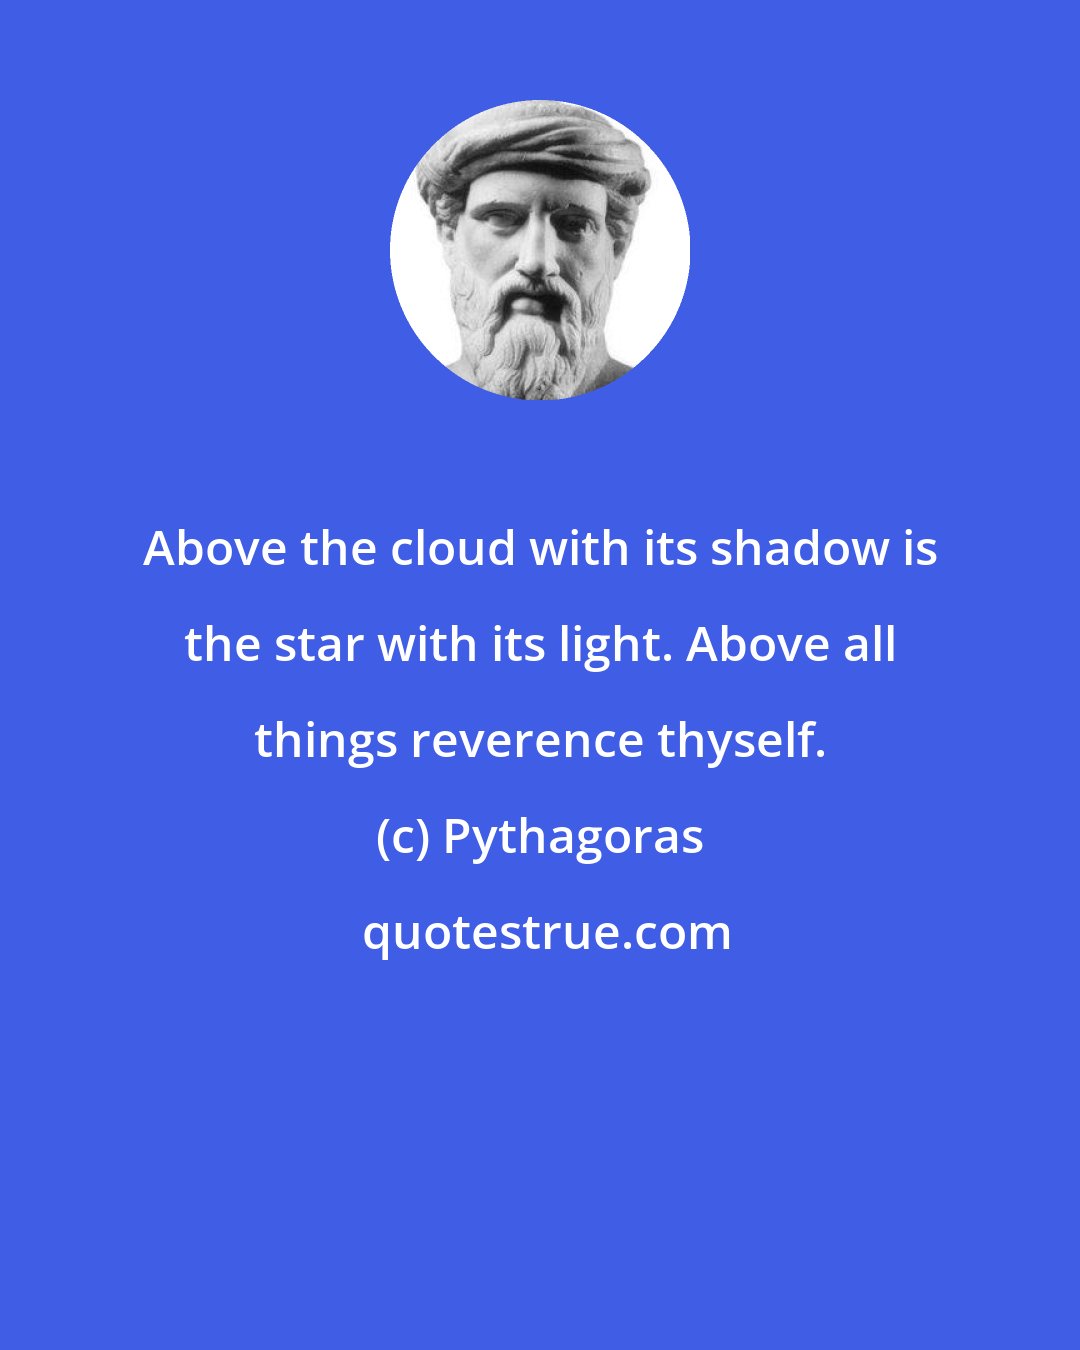 Pythagoras: Above the cloud with its shadow is the star with its light. Above all things reverence thyself.